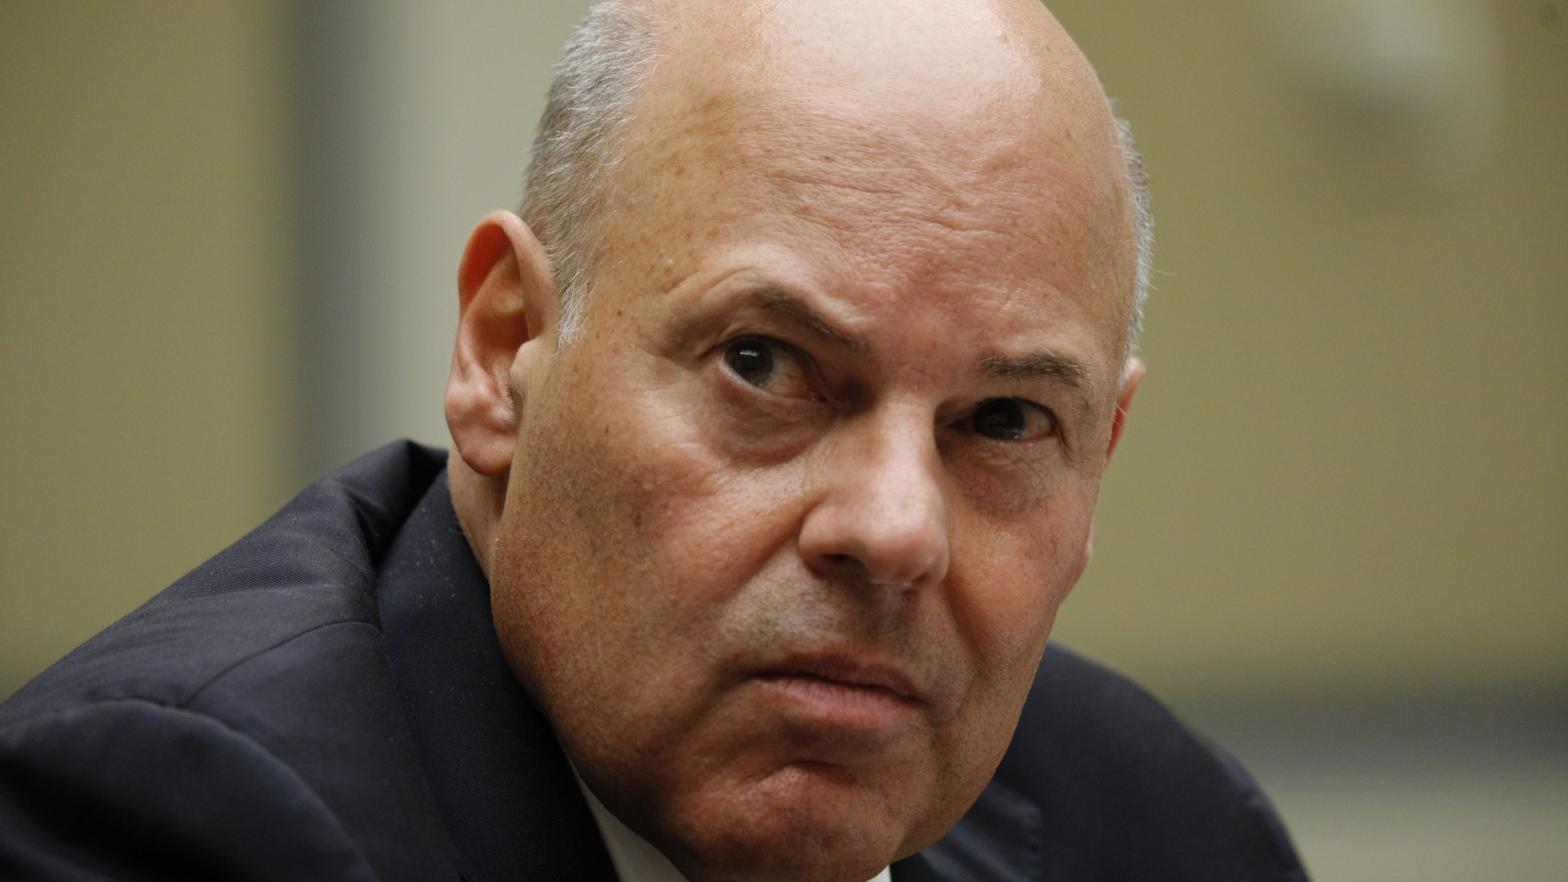 U.S. Postal Service Postmaster General Louis DeJoy testifies at a House Oversight and Reform Committee hearing in the Rayburn House Office Building on August 24, 2020 on Capitol Hill in Washington, DC.  (Photo: Pool, Getty Images)